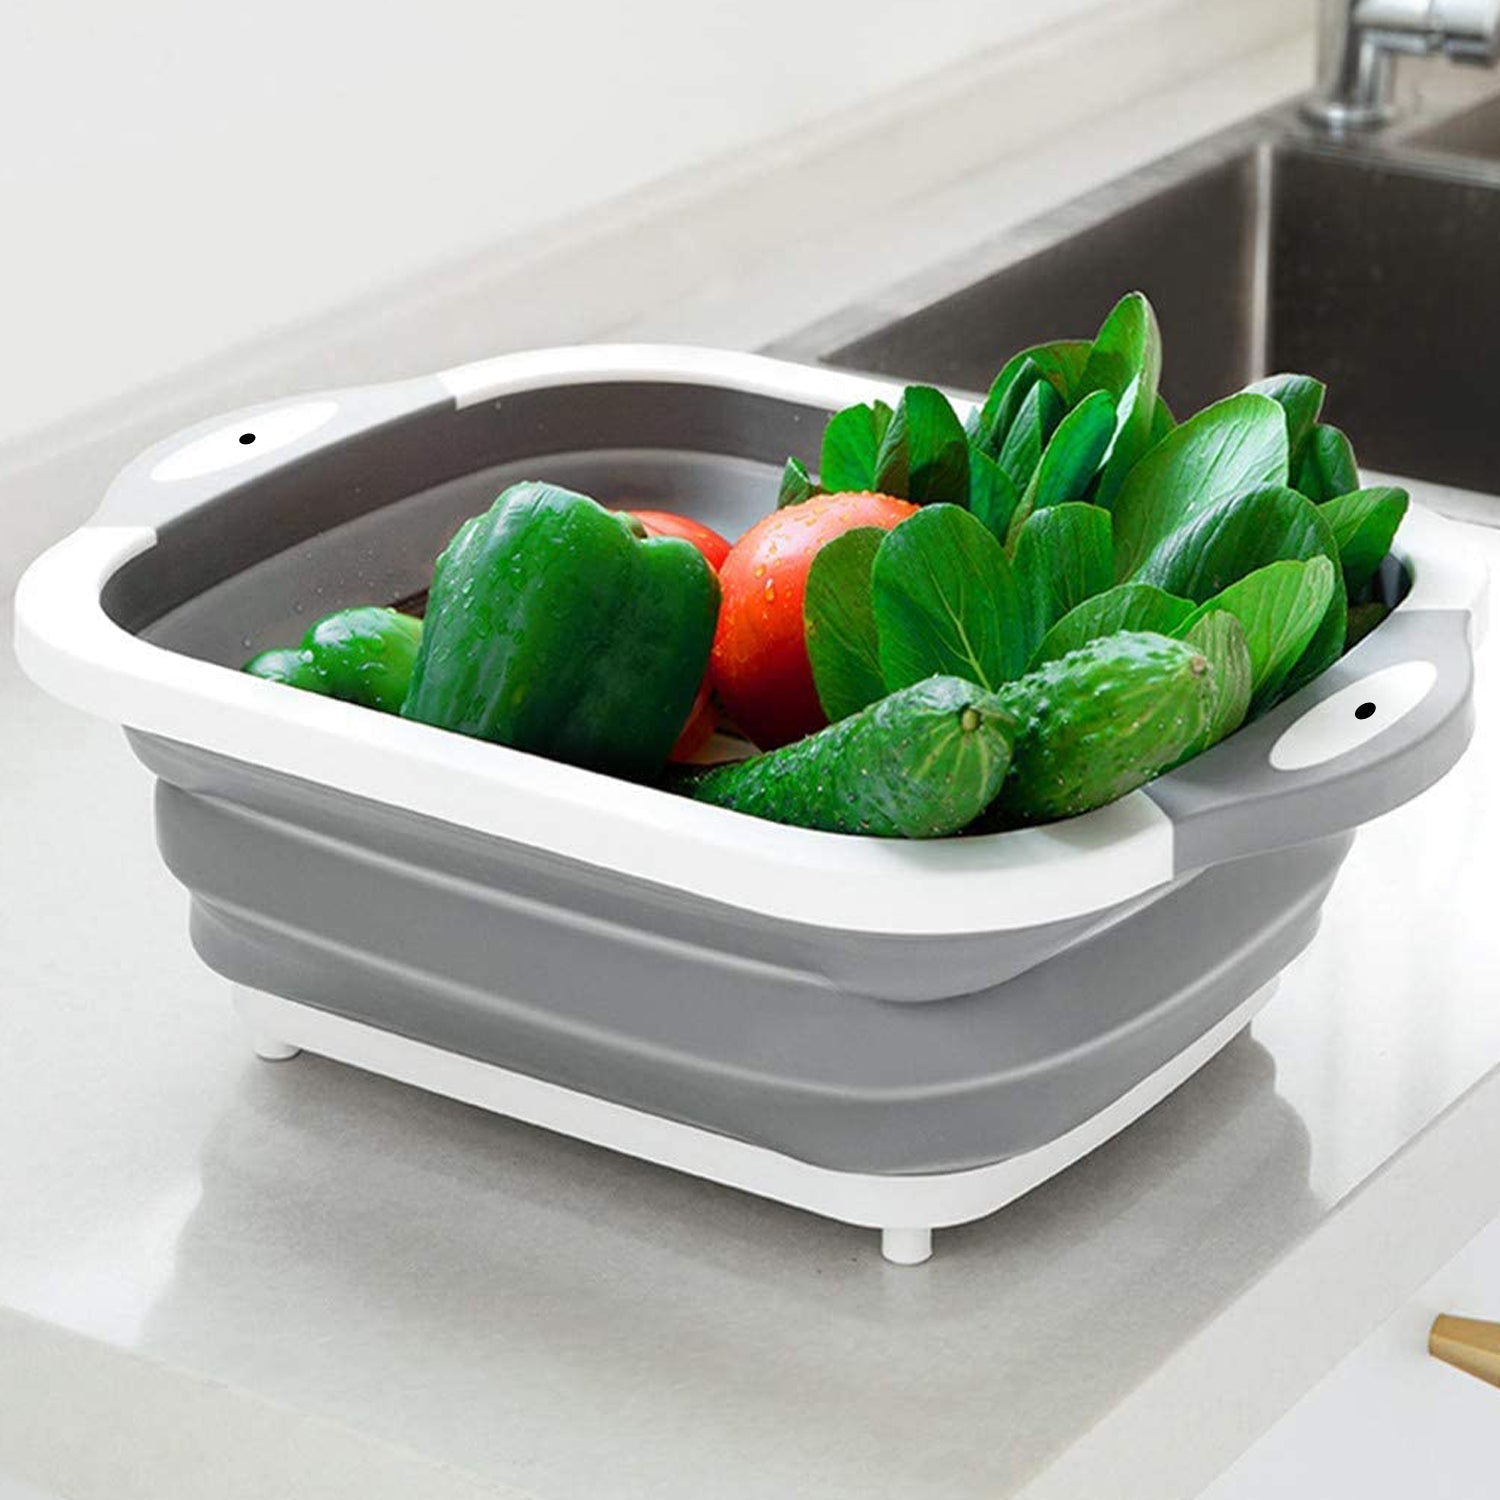 0098L COLLAPSIBLE CUTTING BOARD WITH DISH TUB BASKET For Kitchen Use ( 1 Pcs ) 